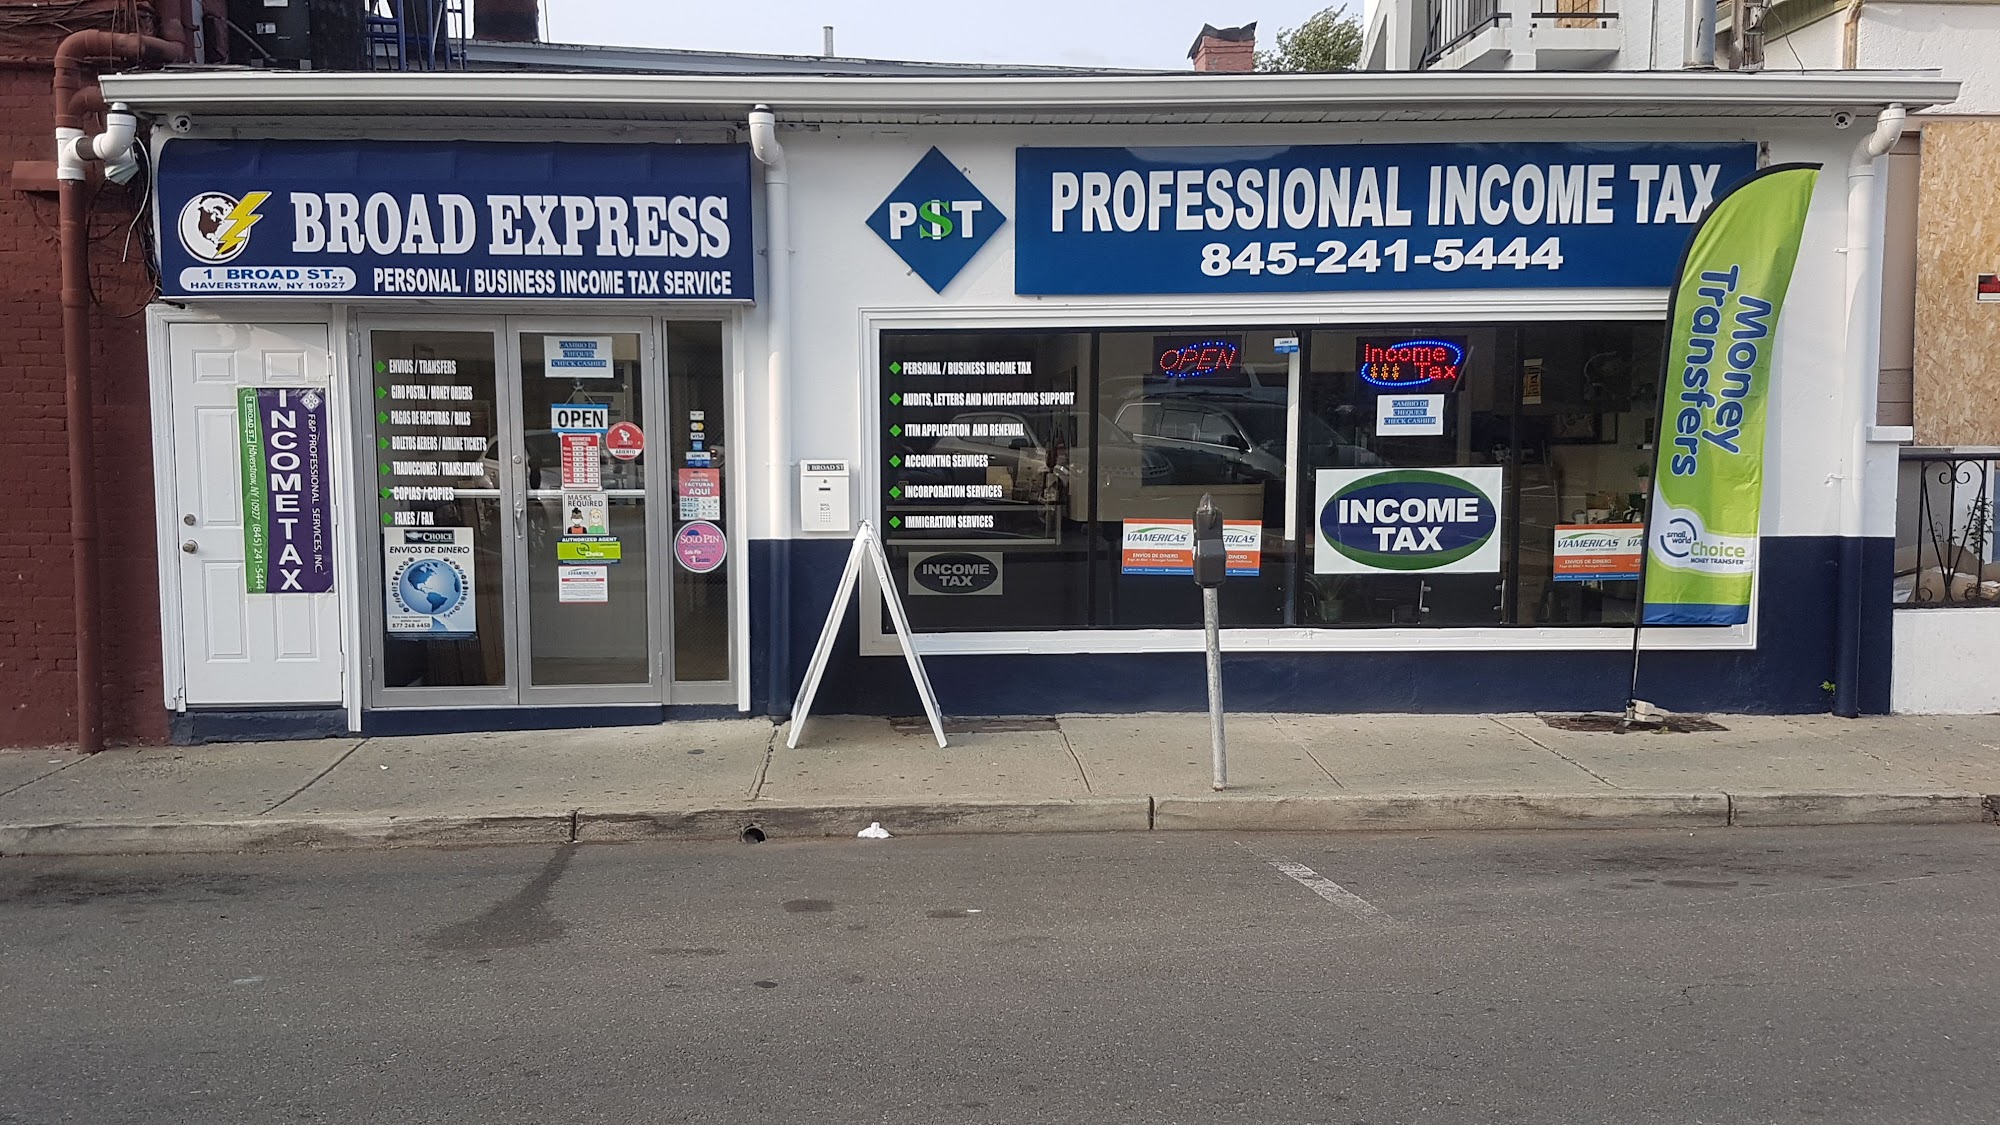 Professional Income Tax 1 Broad St, Haverstraw New York 10927